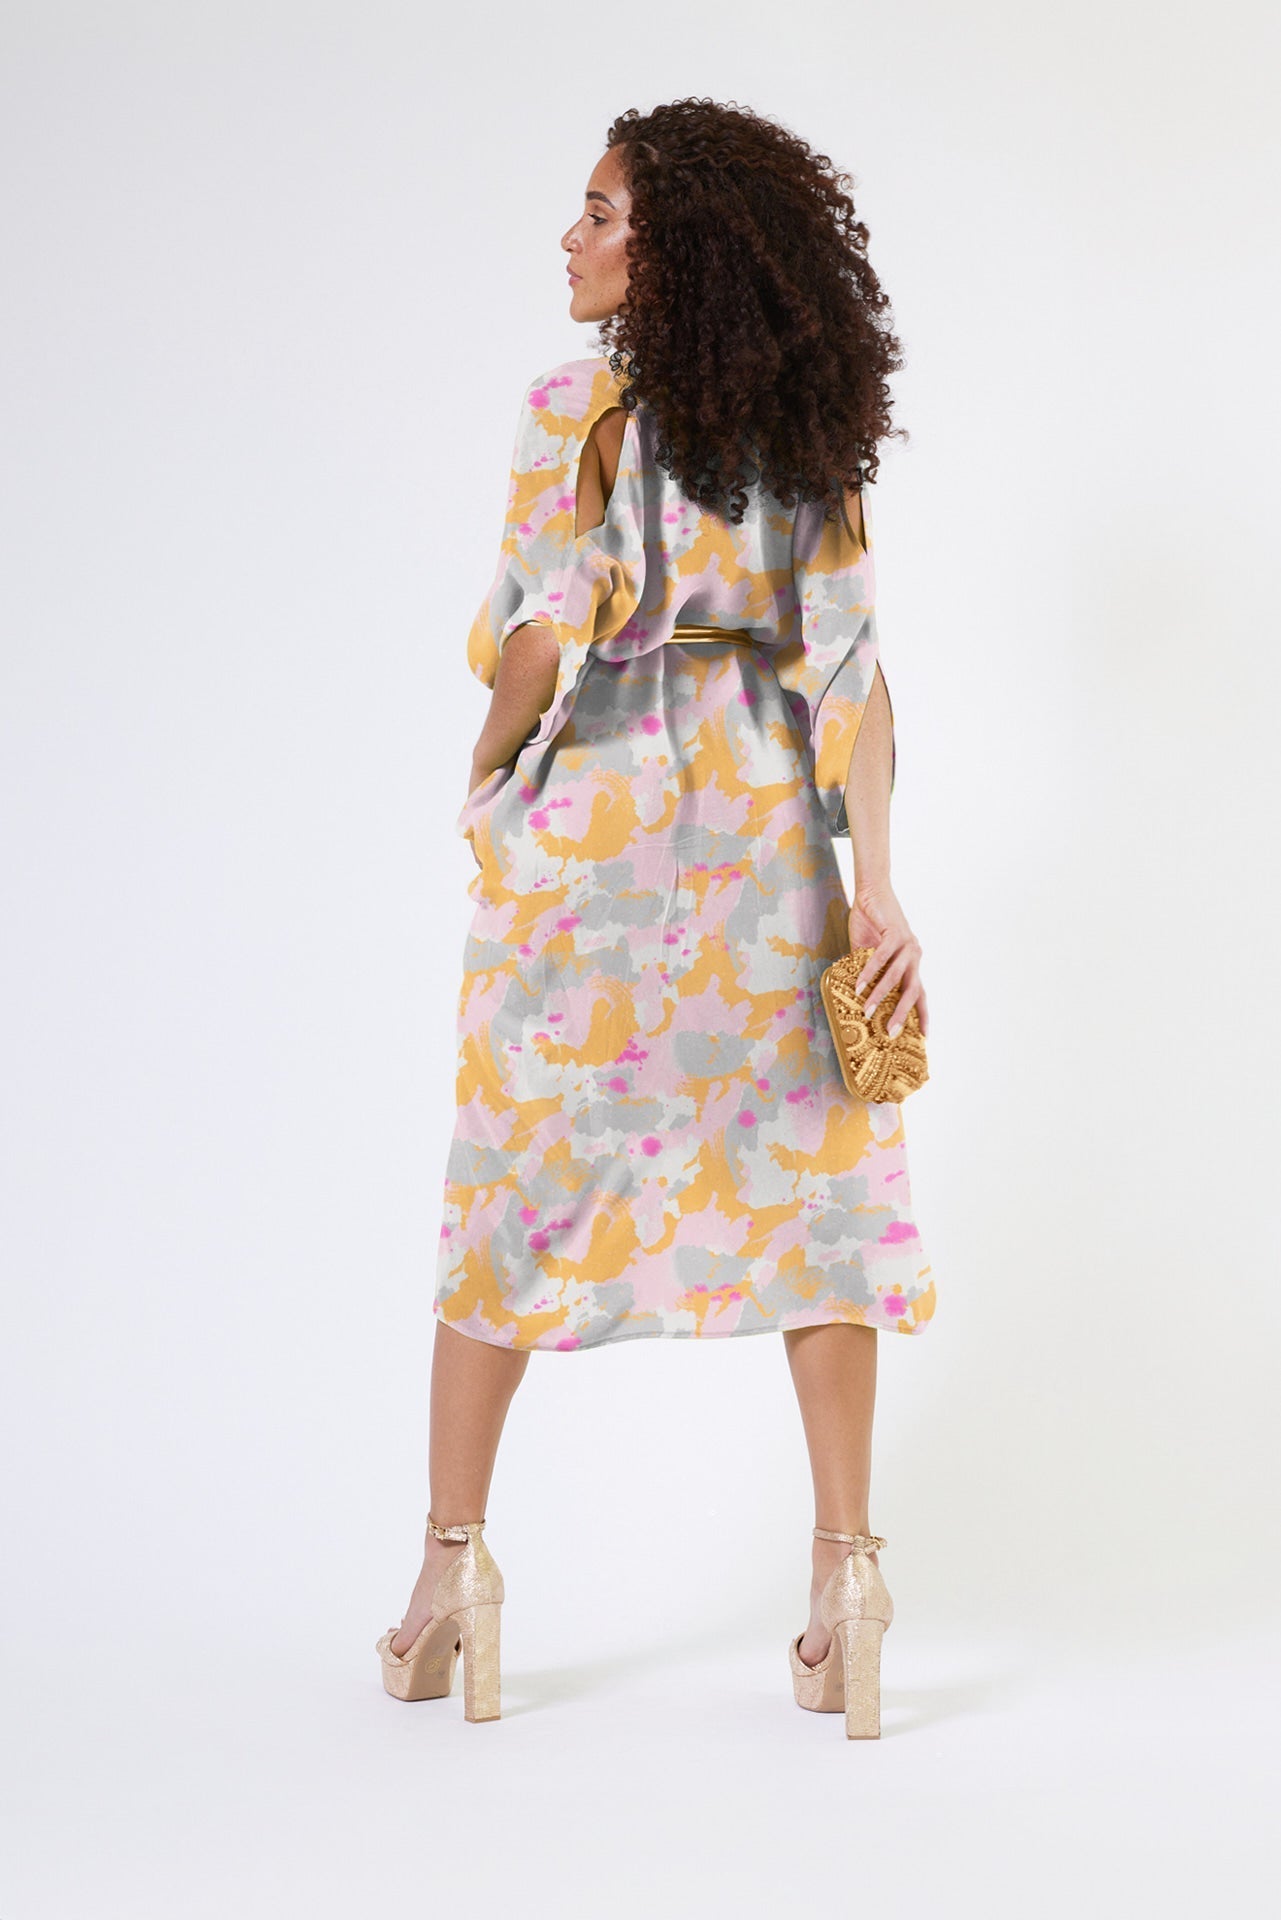 back view of woman modelling a pink army print kaftan duster with front zipper made from recycled materials